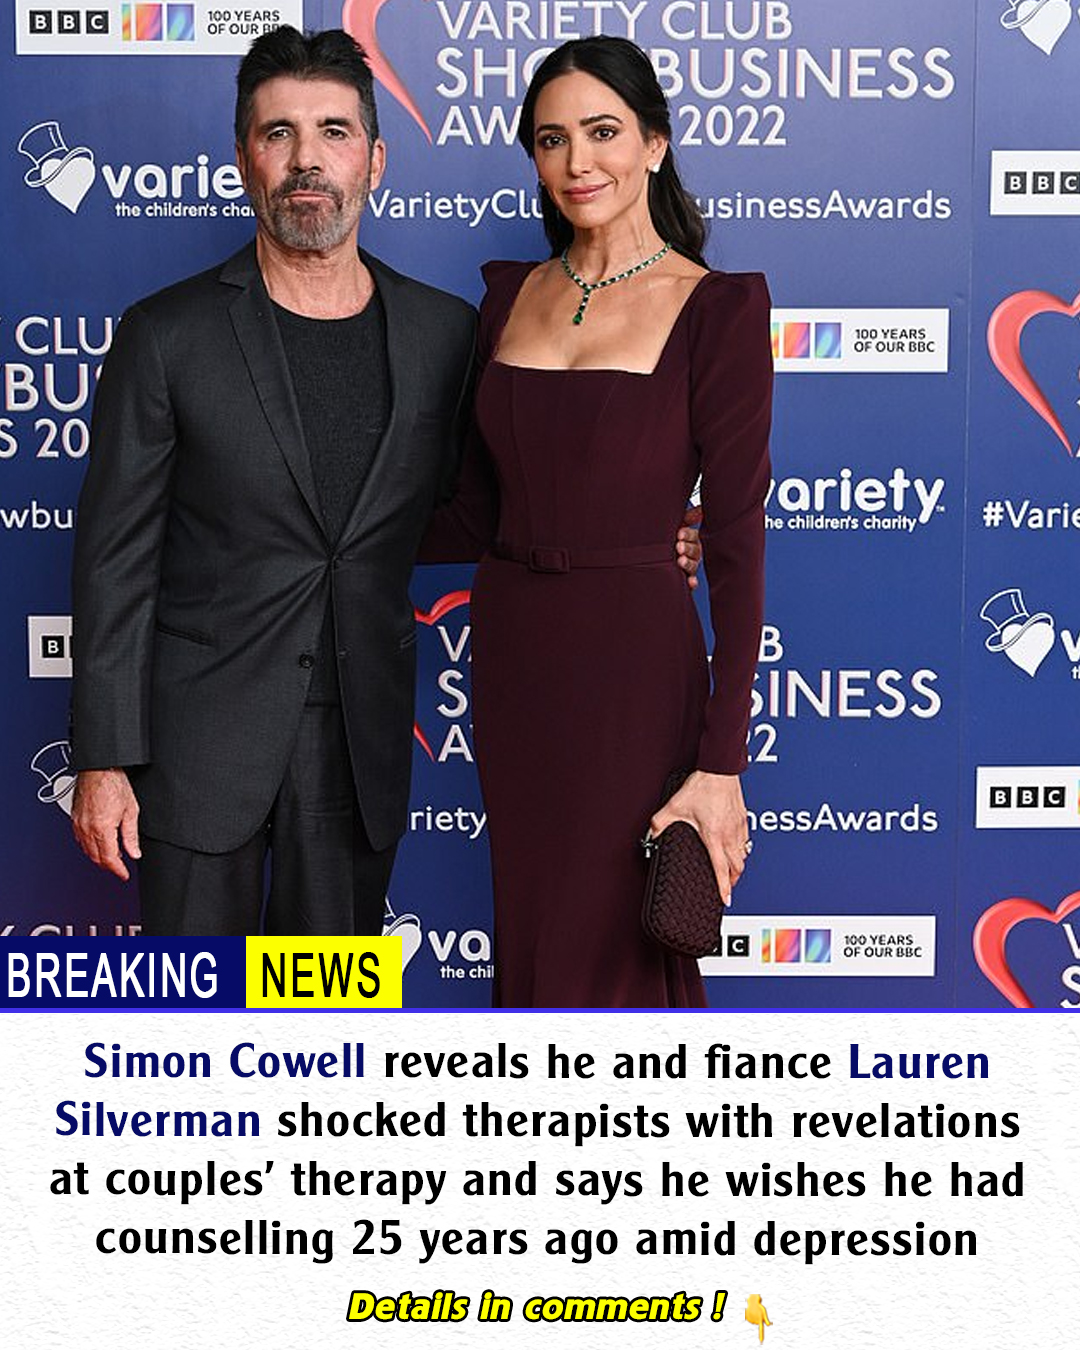 Simon Cowell Reveals He And Fiance Lauren Silverman Shocked Therapists With Revelations At